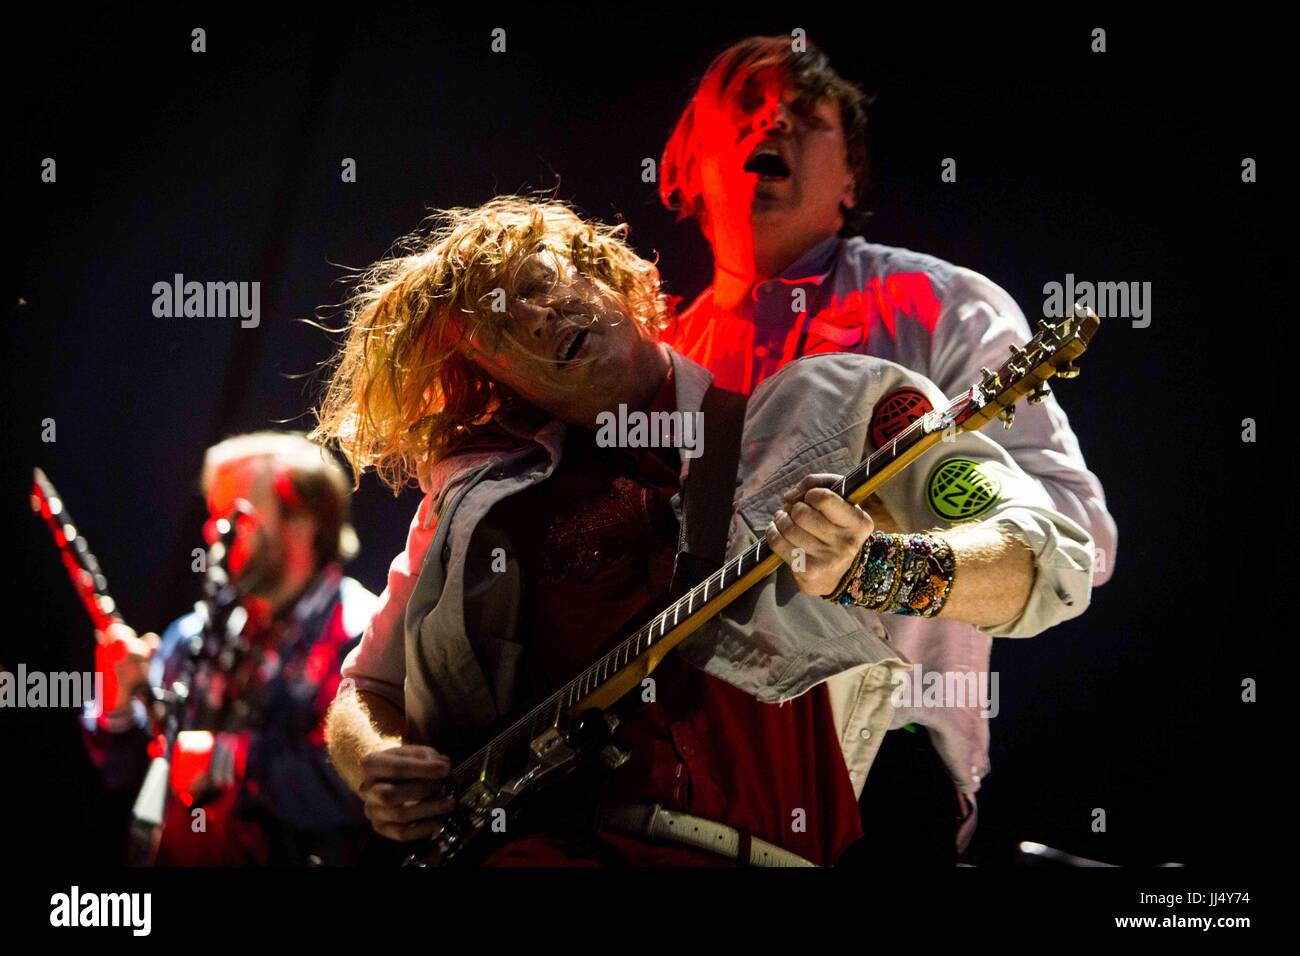 Milan, Italy. 17th July, 2017. Richard Reed Parry of the canadian indie rock band Arcade Fire pictured on stage as they perform at Milano Summer Festival, Ippodromo San Siro Milan. Credit: Roberto Finizio/Pacific Press/Alamy Live News Stock Photo